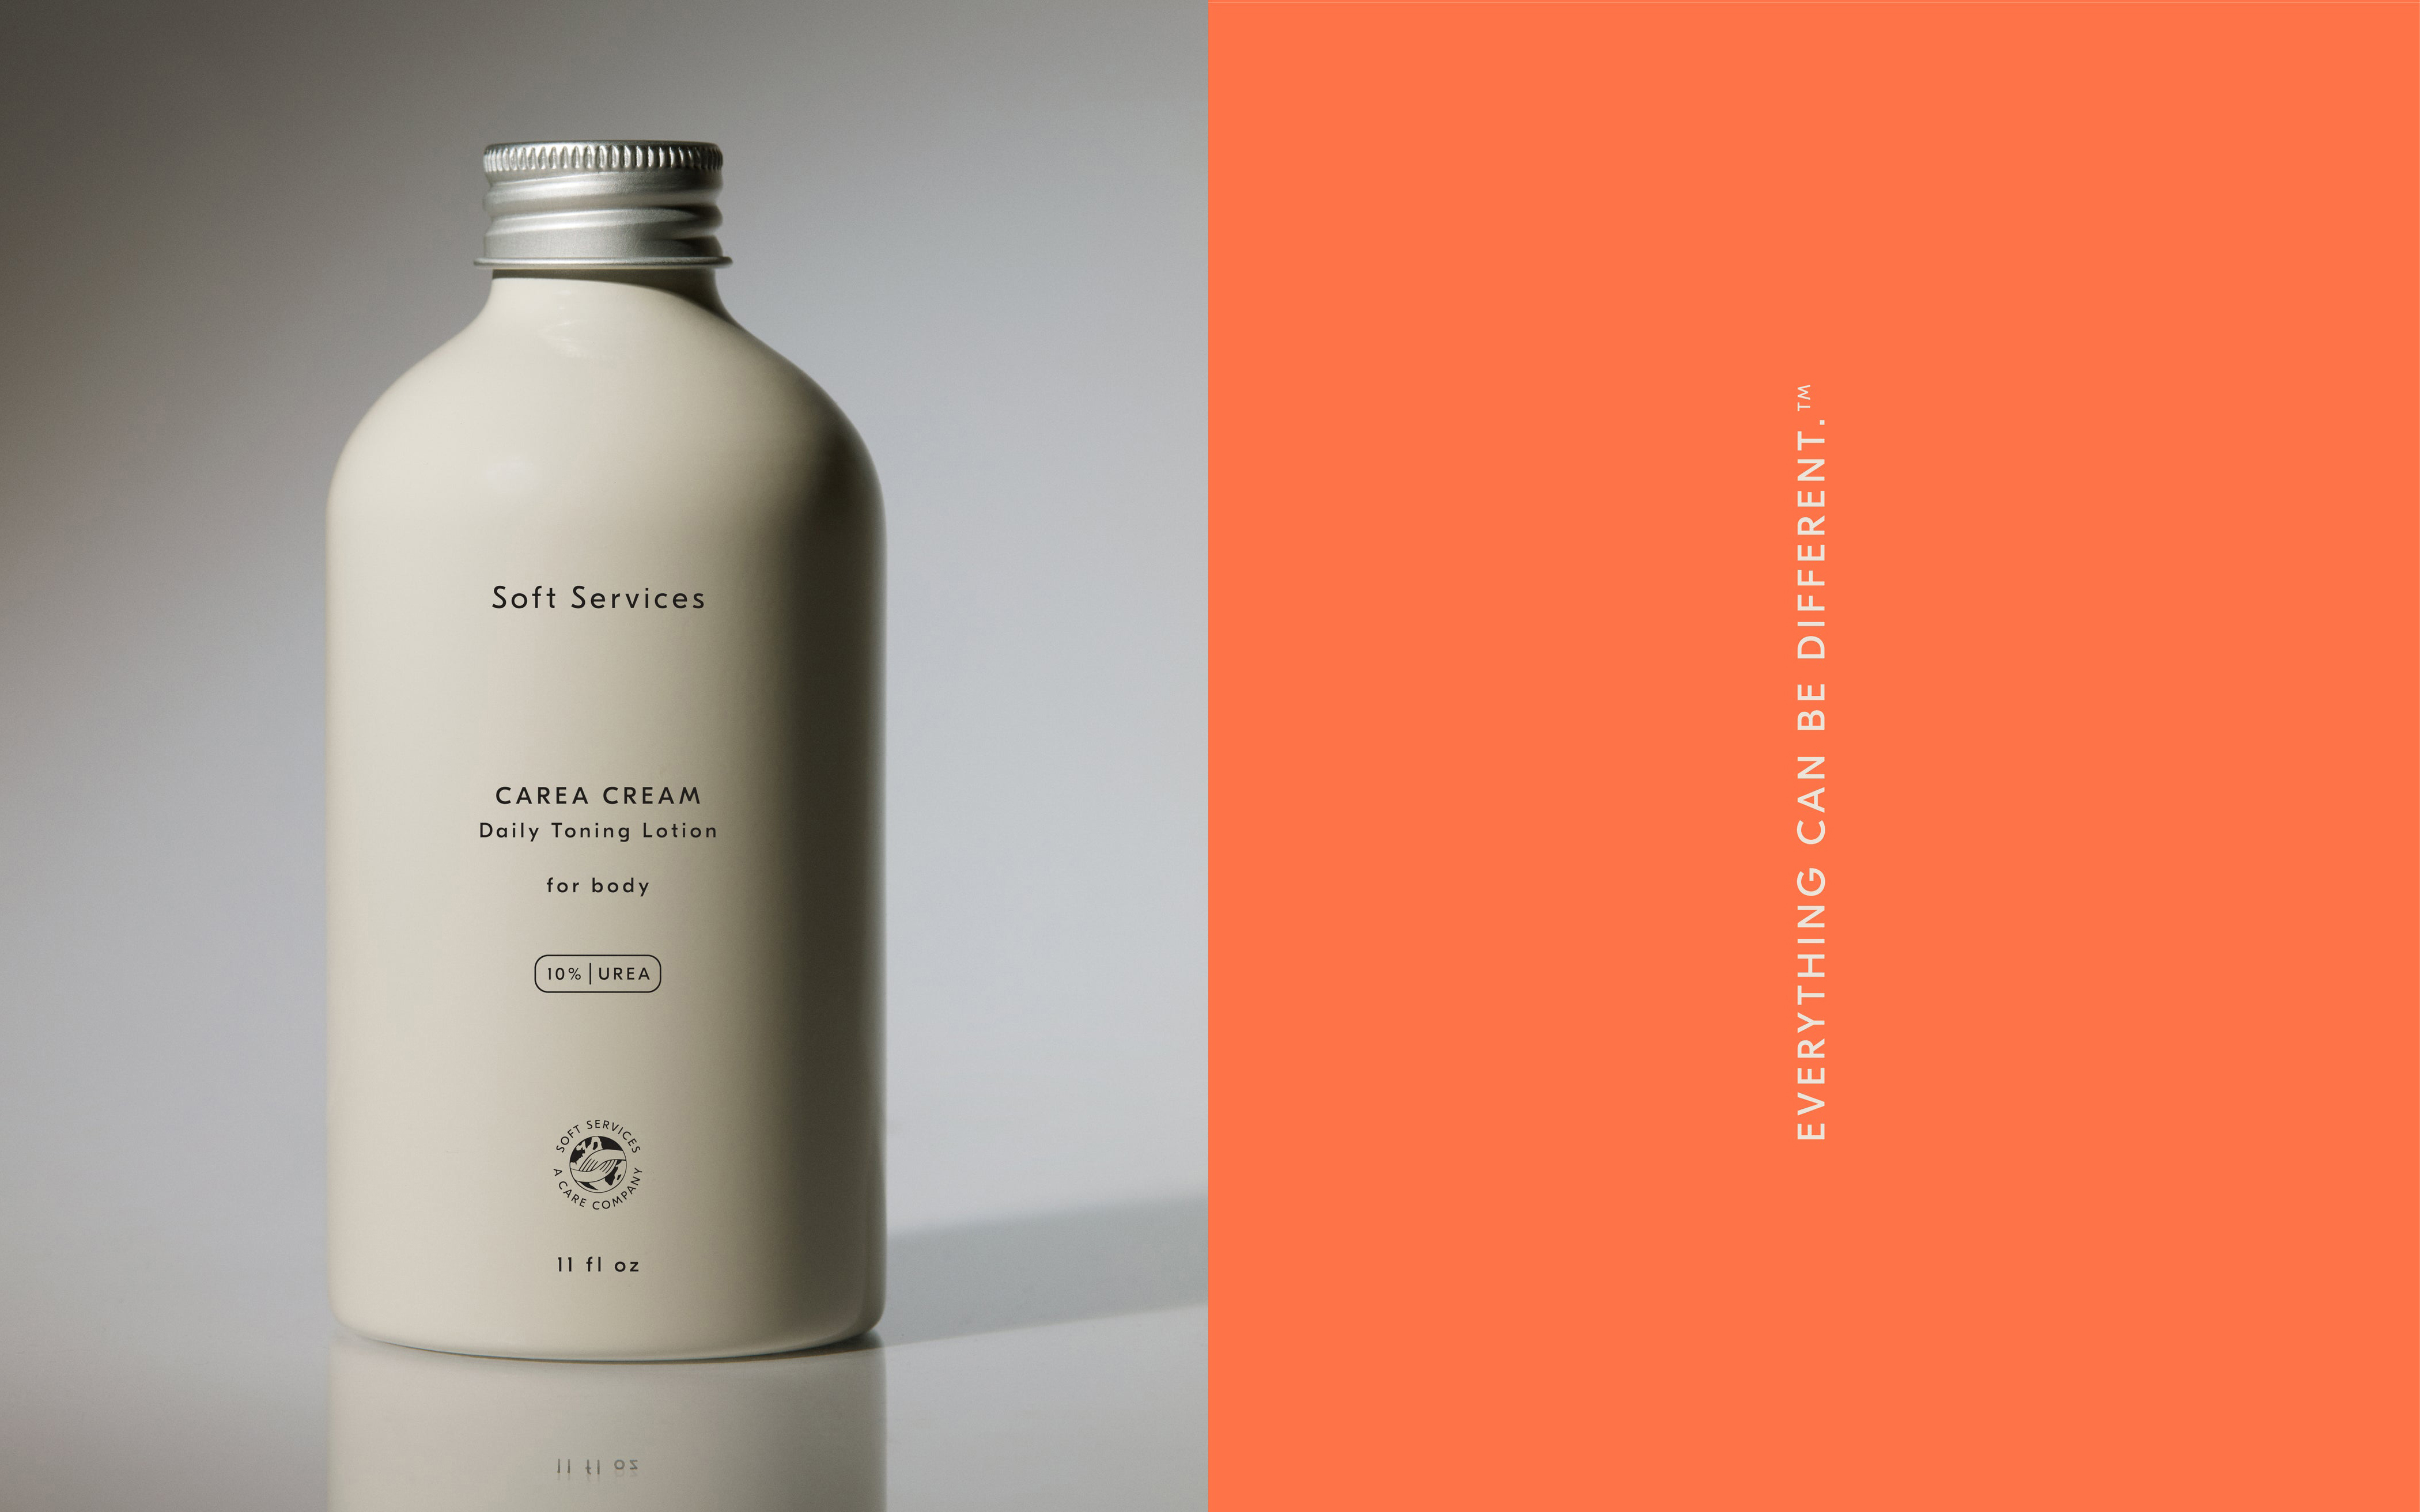 Silkscreen printed bottle design by Decade for New York-based skincare brand Soft Services